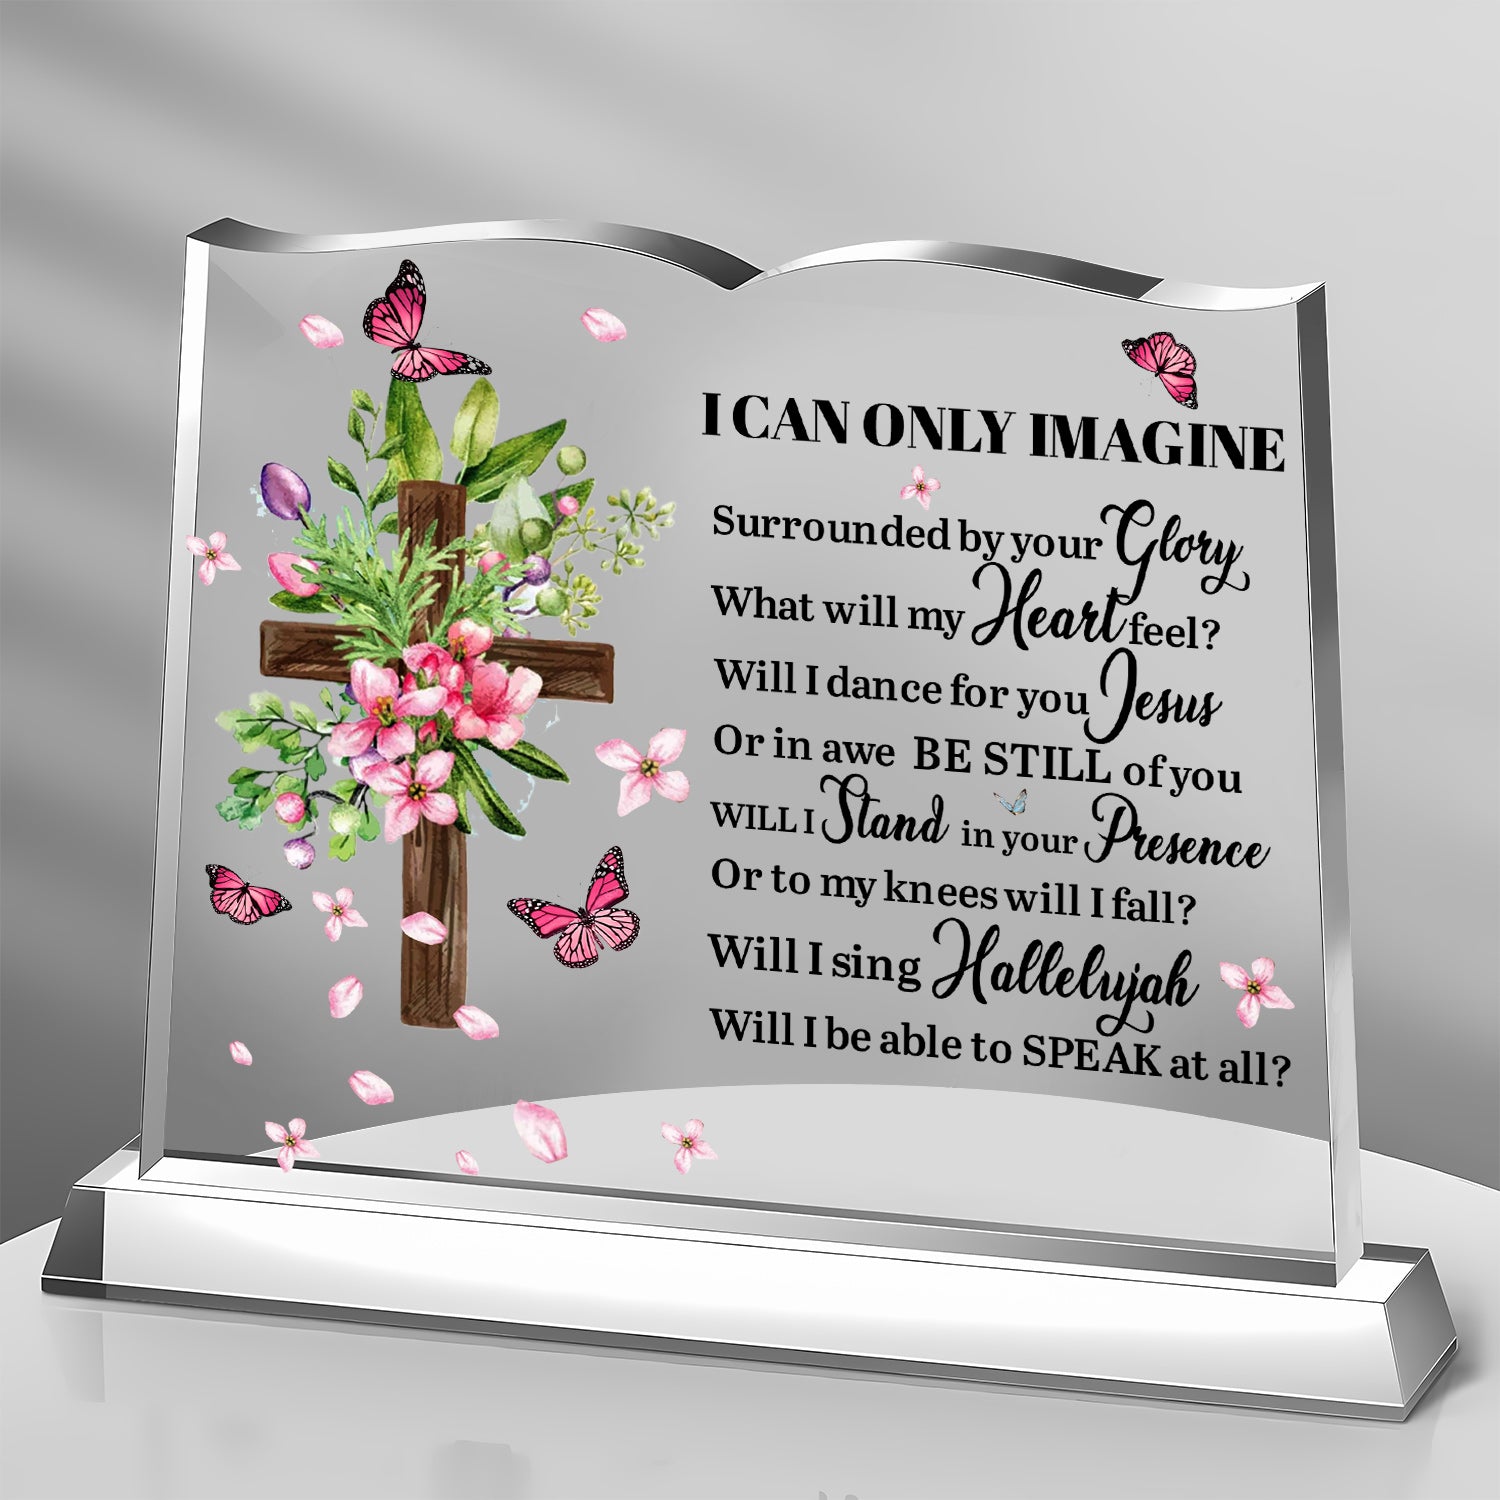 Surrounded By Your Glory Book Shaped Acrylic Plaque Christian Gifts Bible Verses Religious Gifts